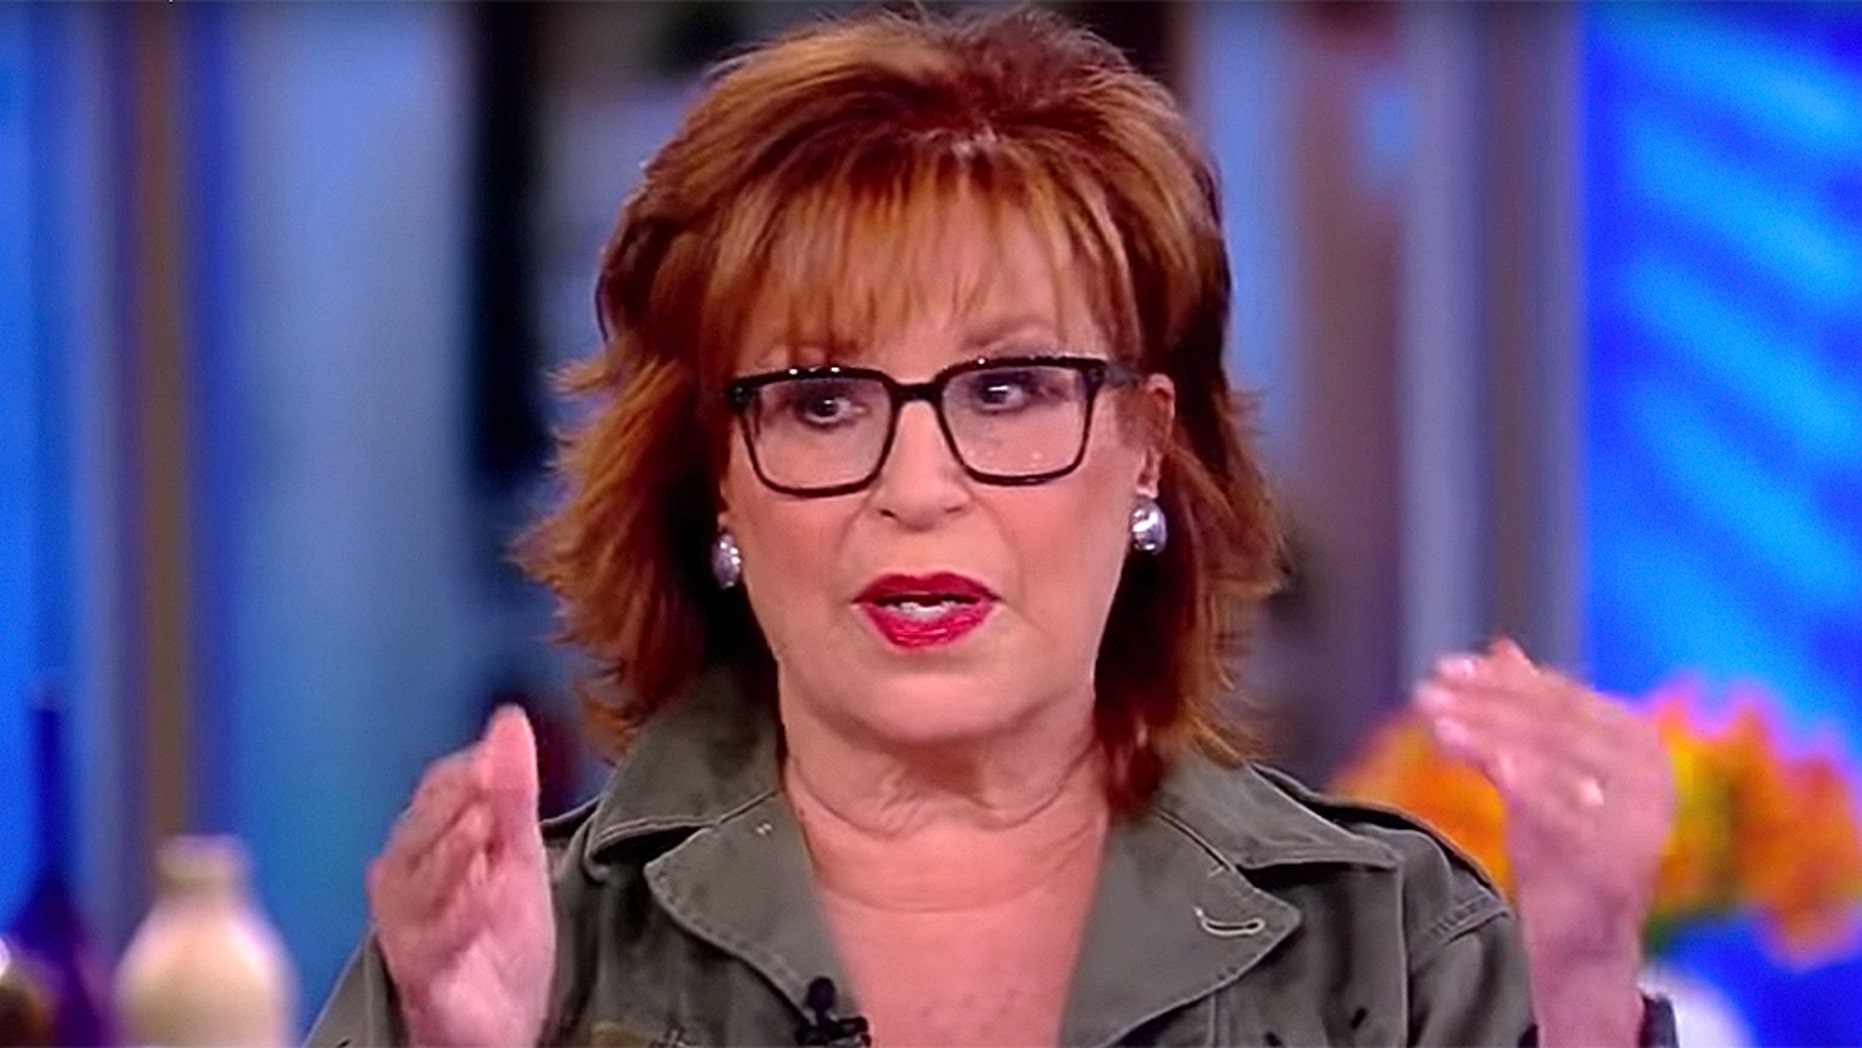 'The View' host Joy Behar checks herself after slip of tongue 'I don't